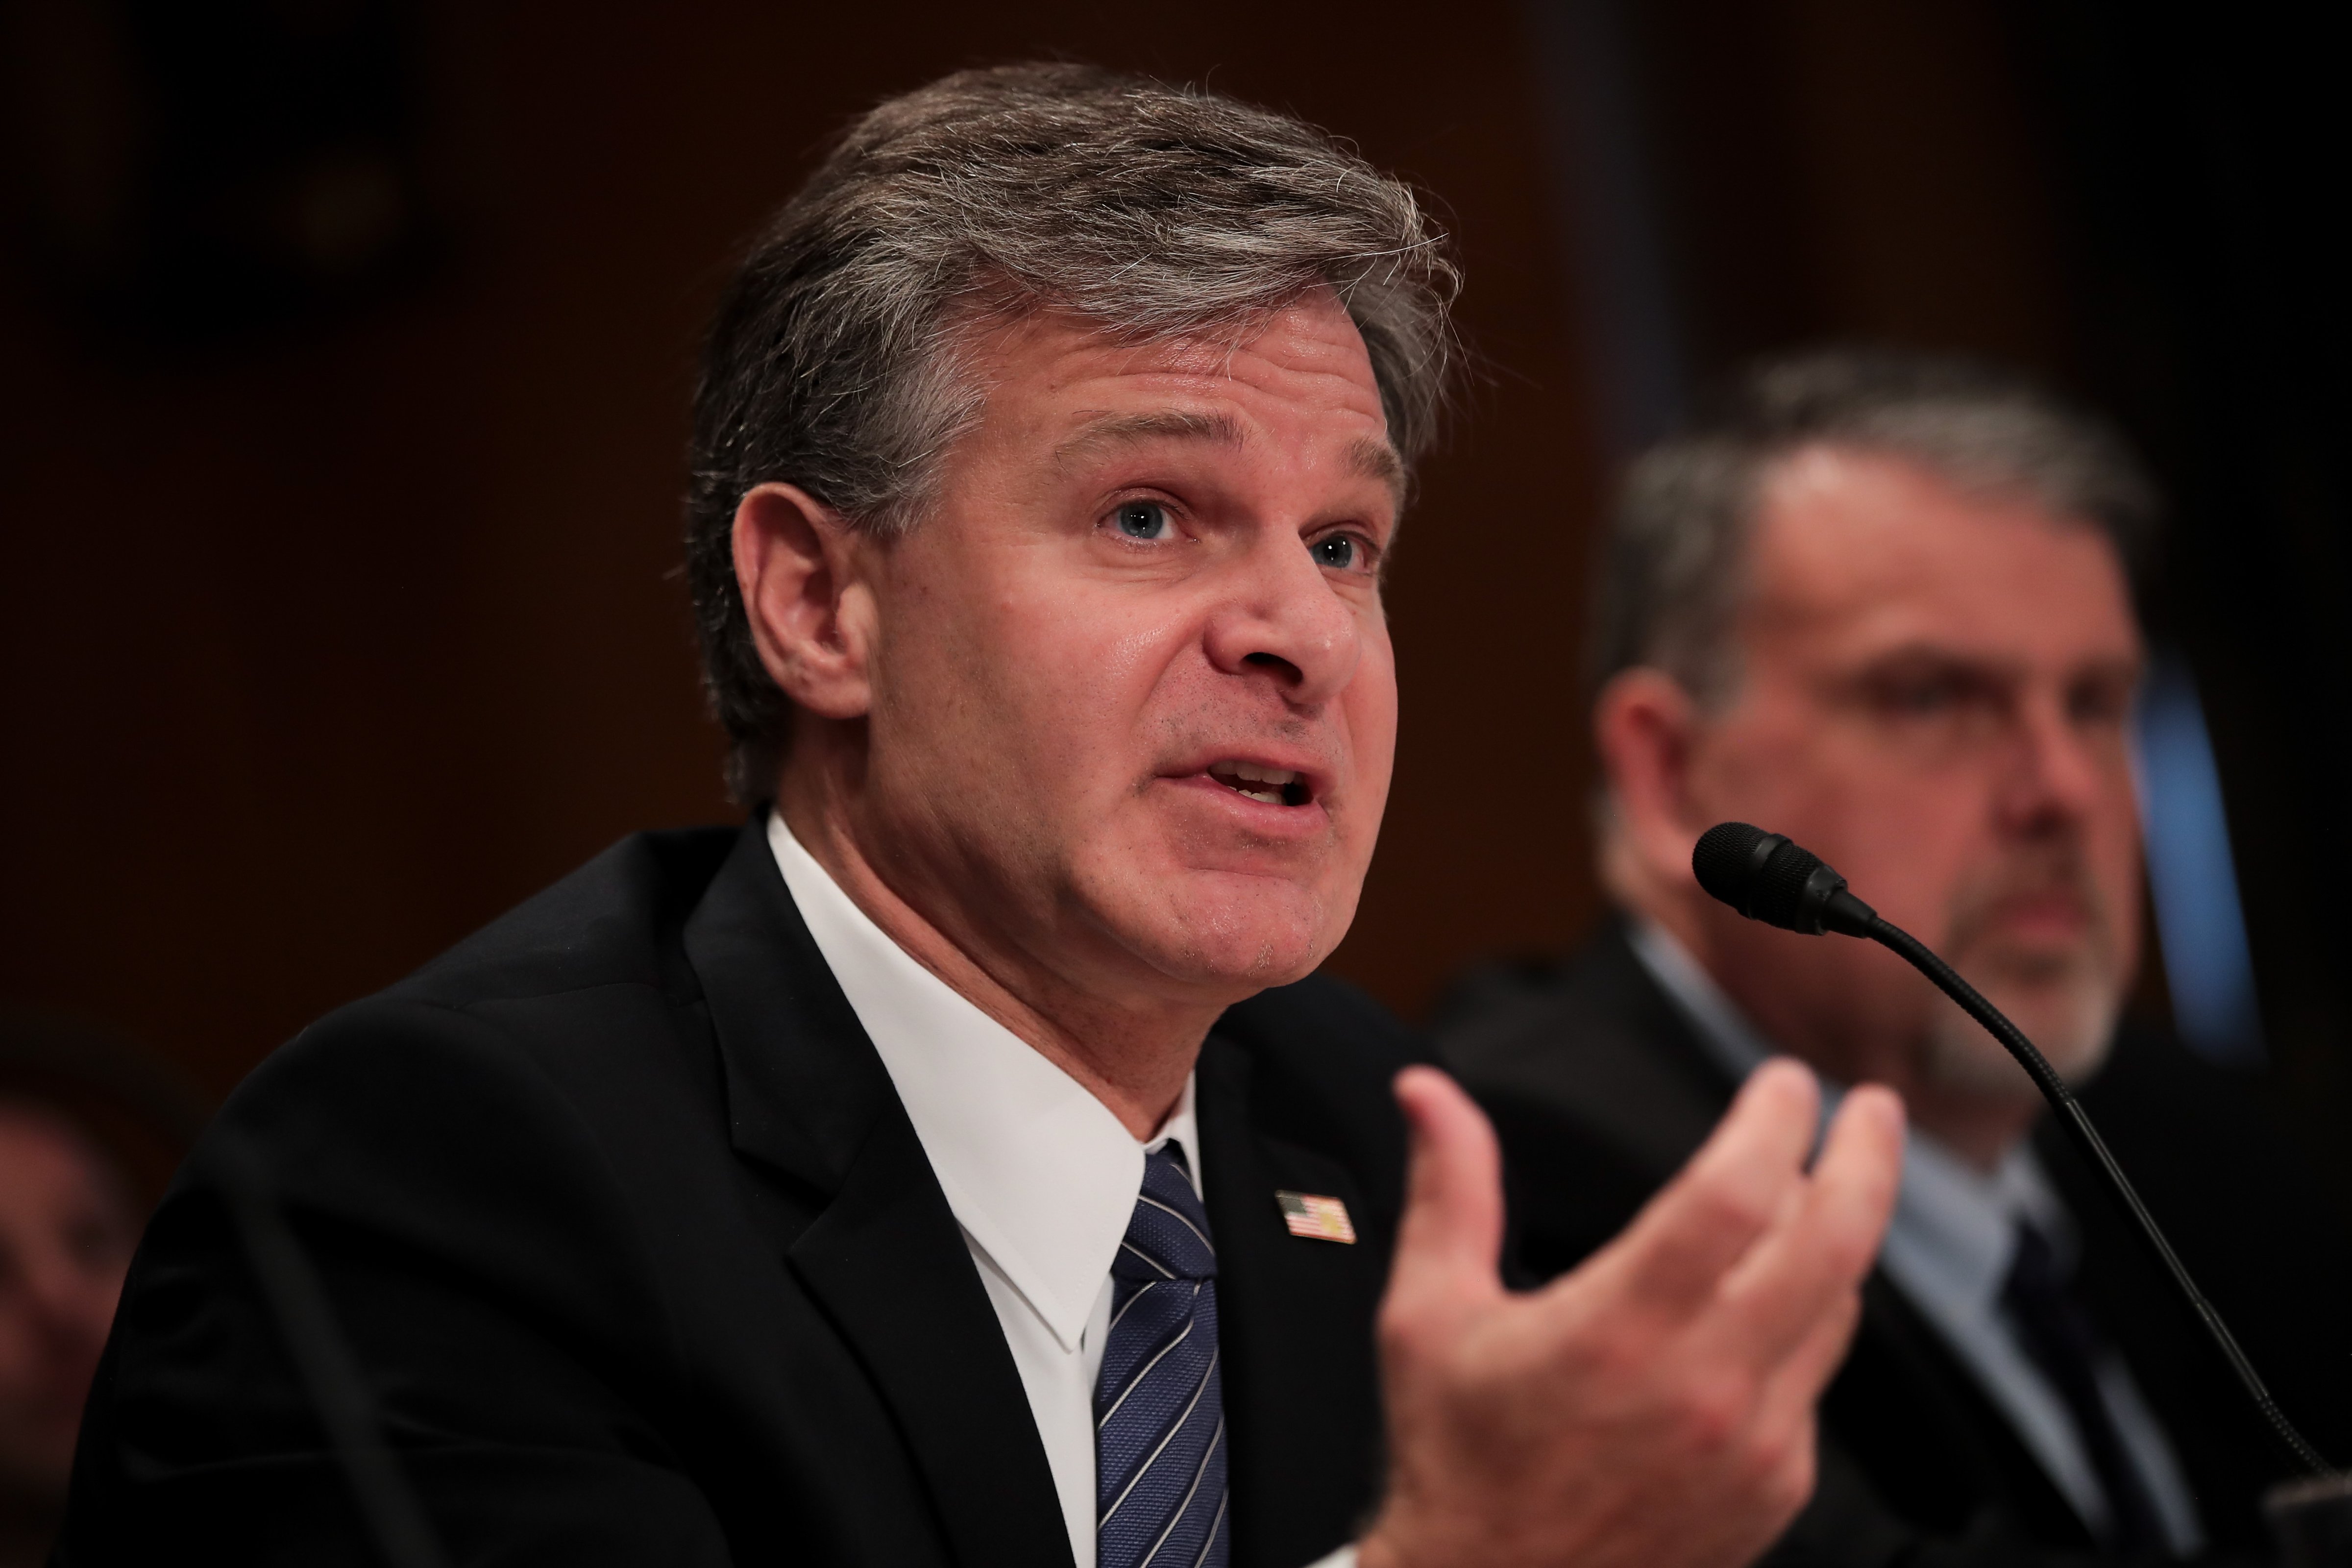 Director of the Federal Bureau of Investigation Christopher Wray listens testifies during a Senate Committee on Homeland Security and Governmental Affairs hearing concerning threats to the homeland, September 27, 2017 in Washington, DC. (Drew Angerer—Getty Images)